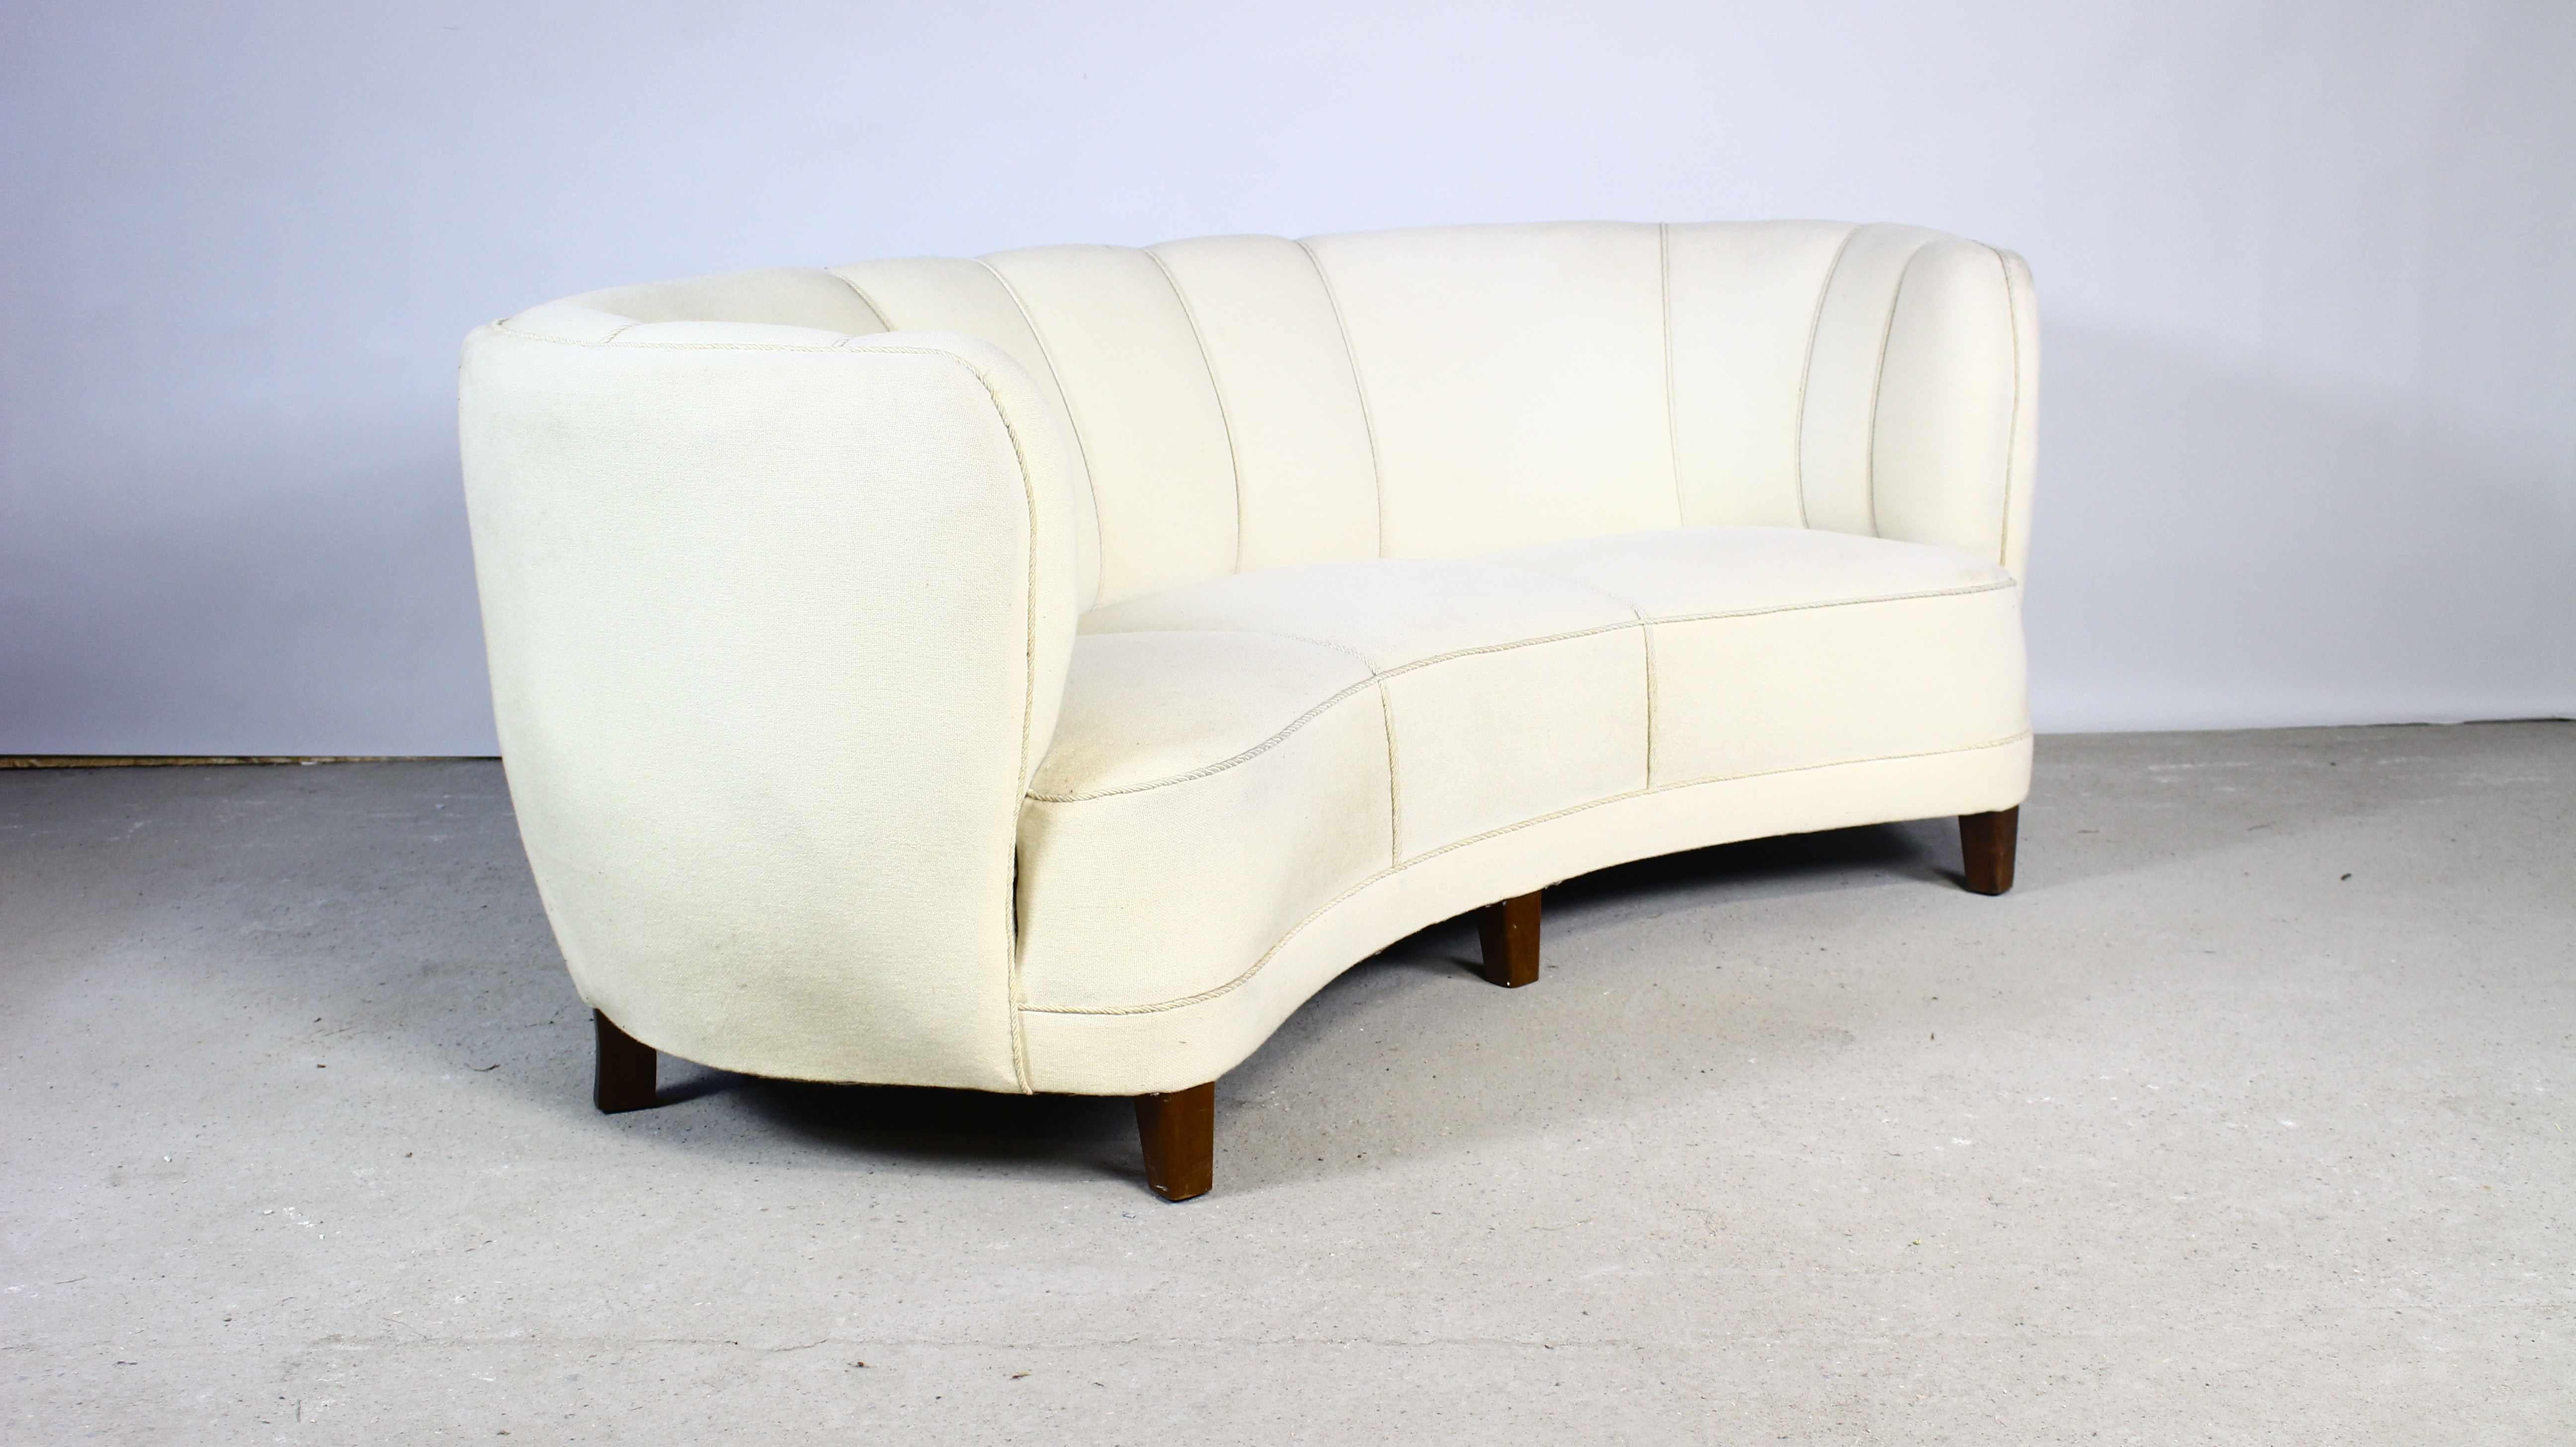 Outstanding Art Deco banana sofa.
Made in Denmark during the 1950s.
Upholstered in white fabric.
Seat with straps and springs.
Stains on the upholstery.